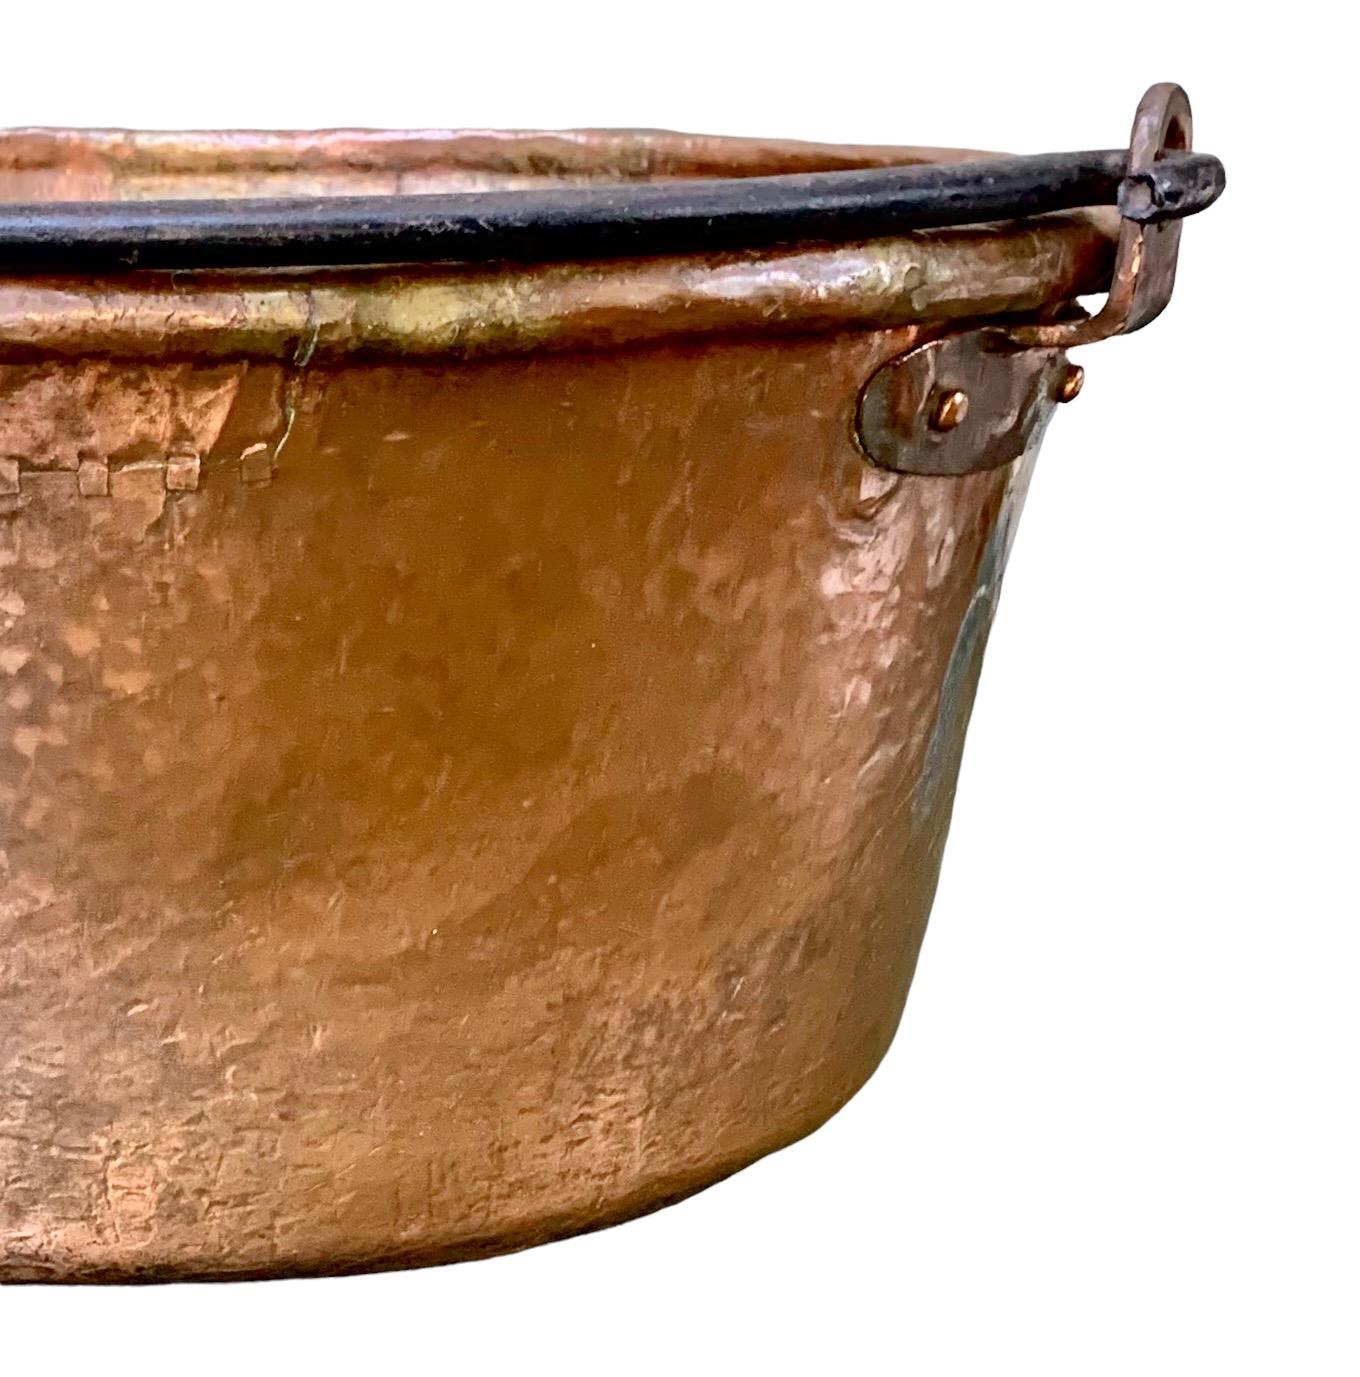 A large early 19th century, French Provincial hammered copper cooking pot/cauldron with a riveted iron swing handle and hand rolled rim with an extraordinary old finish/patina.
Although I have not detected any markings, this piece was beautifully